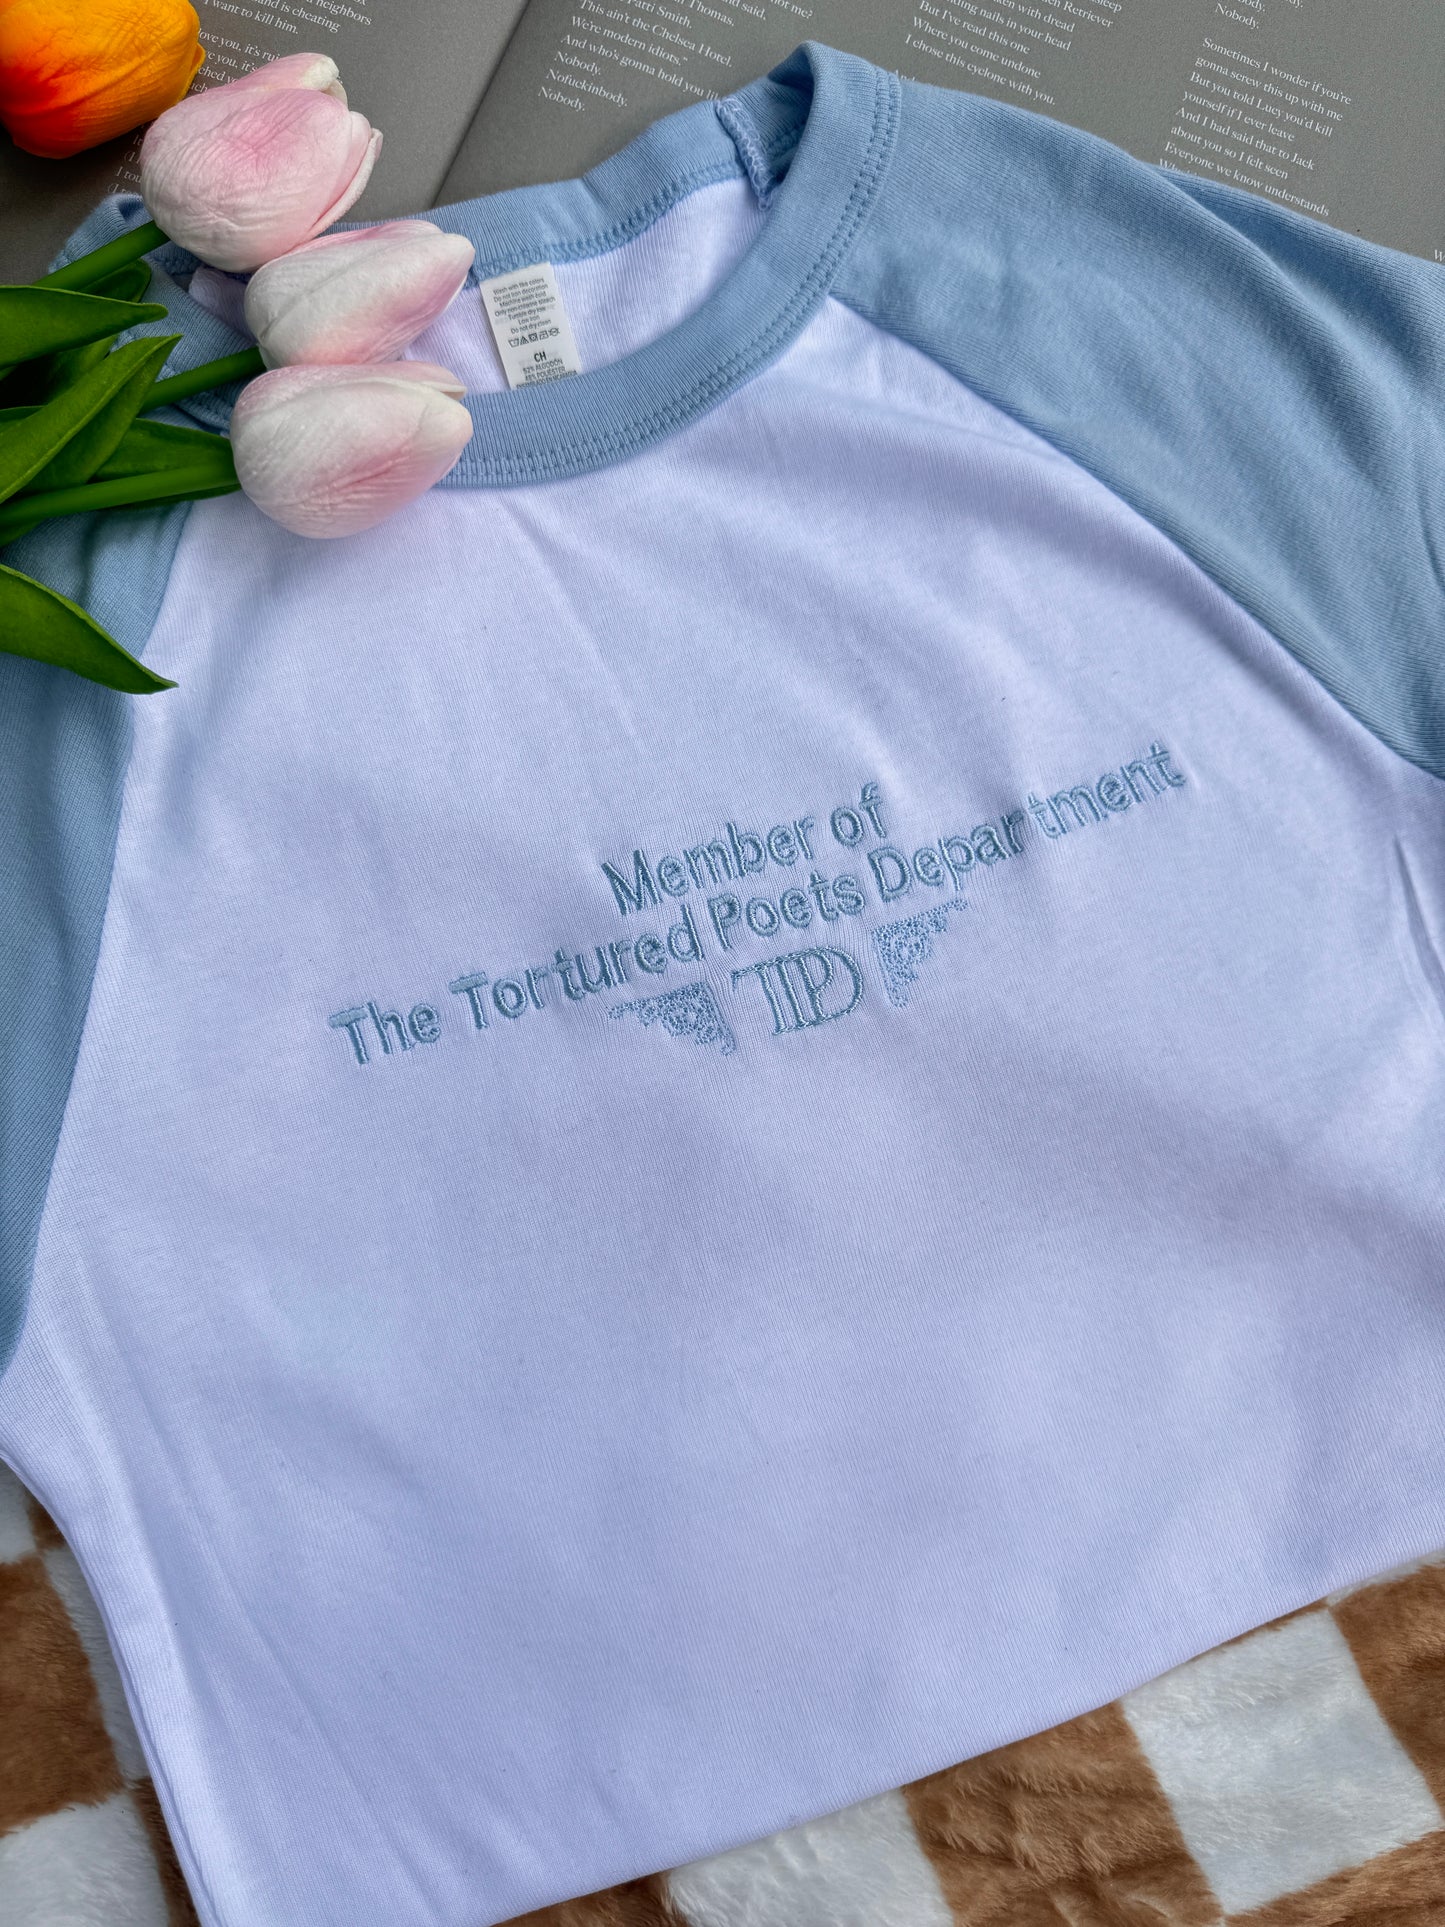 Member of TTPD Cropped T-Shirt